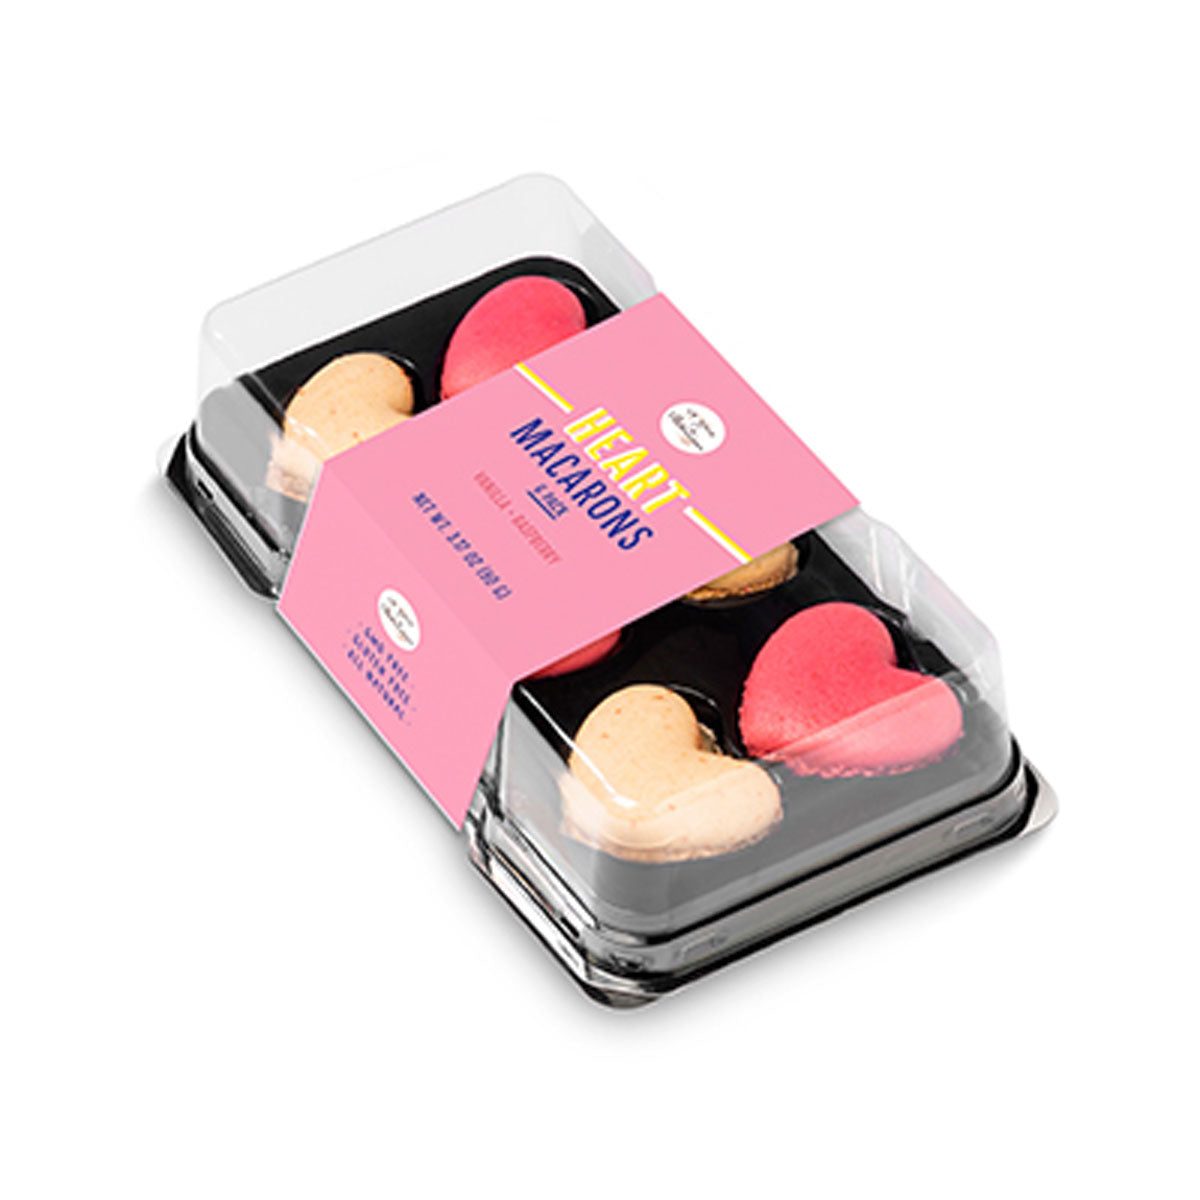 Le Chic Patissier Heart Shaped Macarons 6 CT